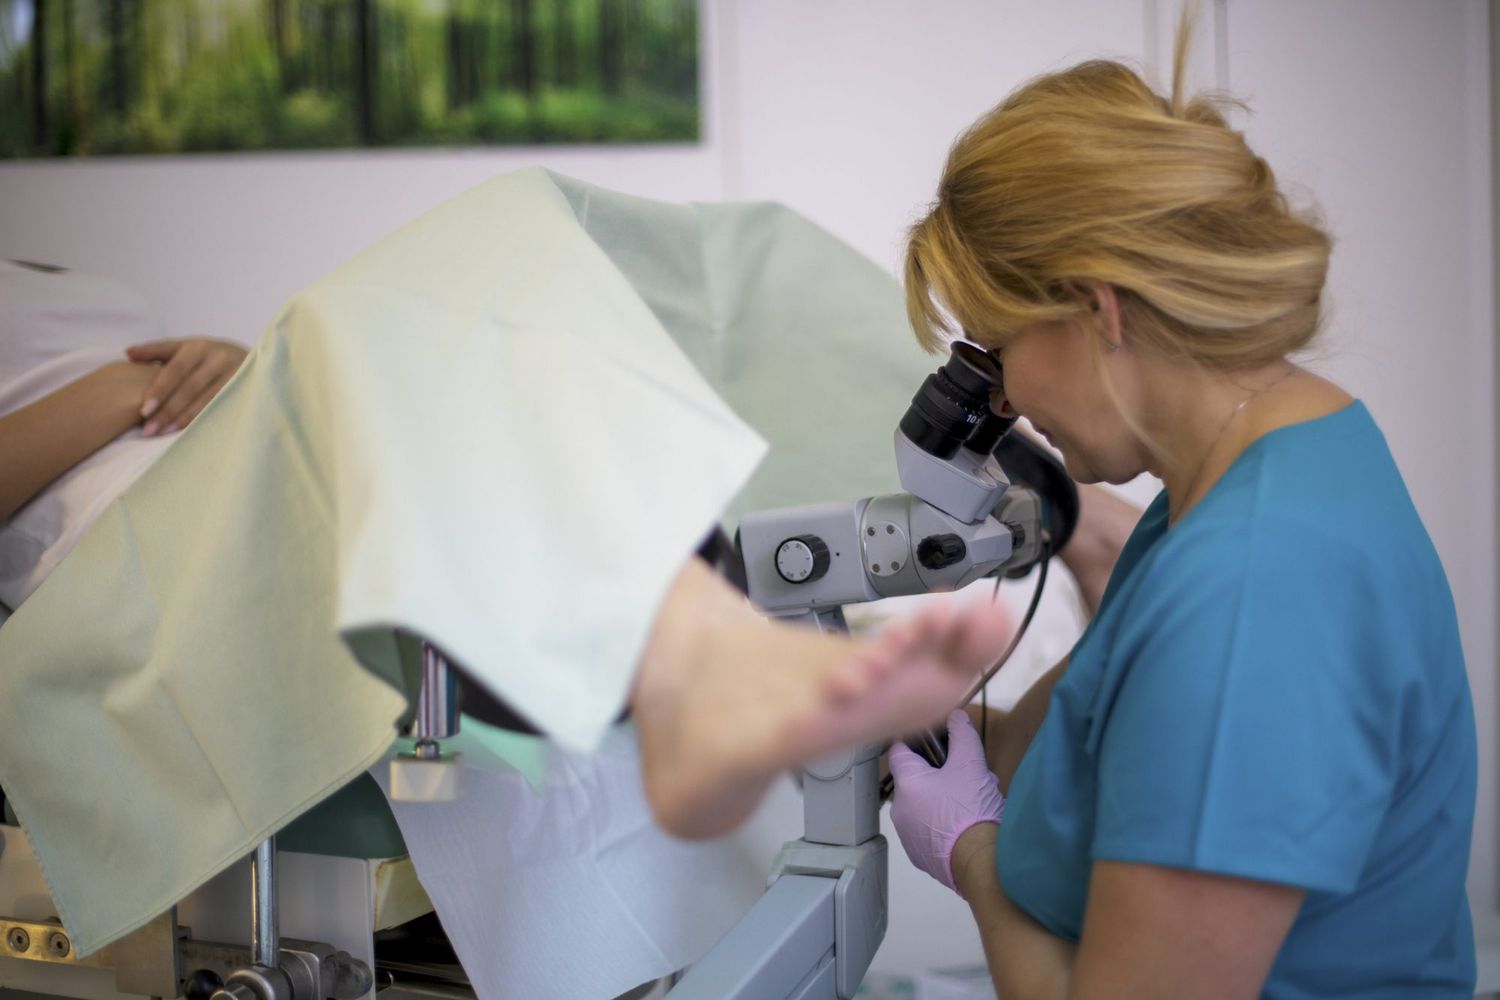 An image of a gynecologist looking at a woman's cervix.